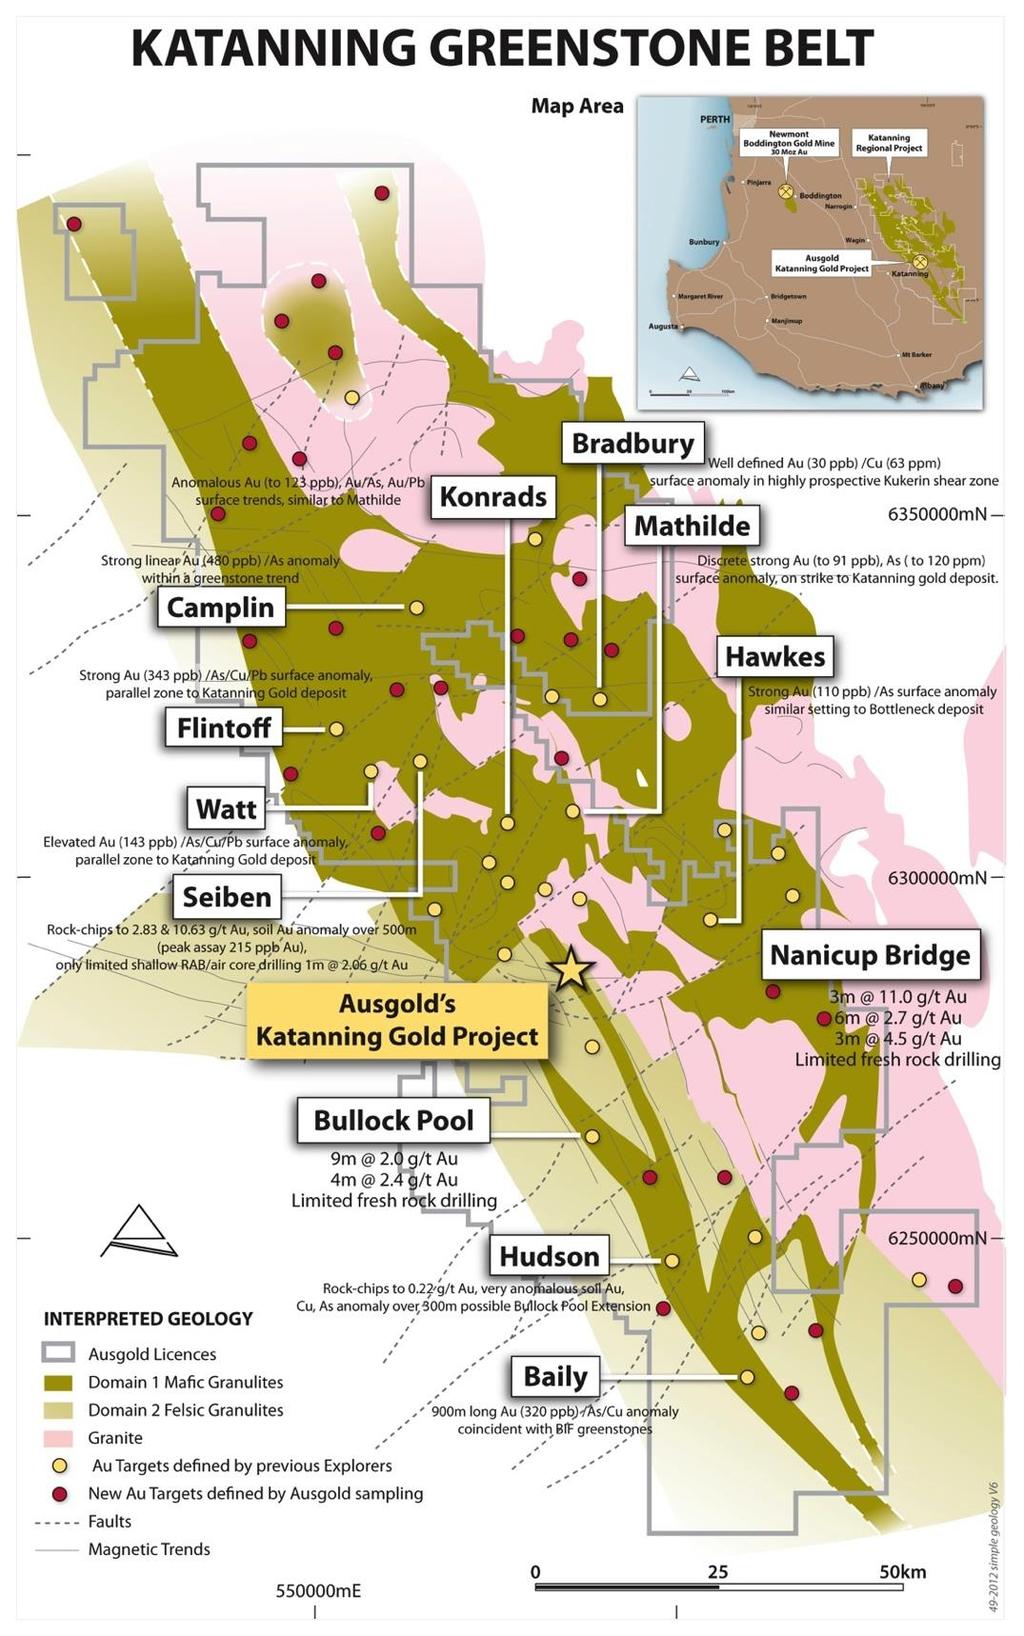 Katanning Regional Project (KRP) The Katanning greenstone belt offers potential for identifying multiple deposits 54 multi-element geochemical targets have been identified for